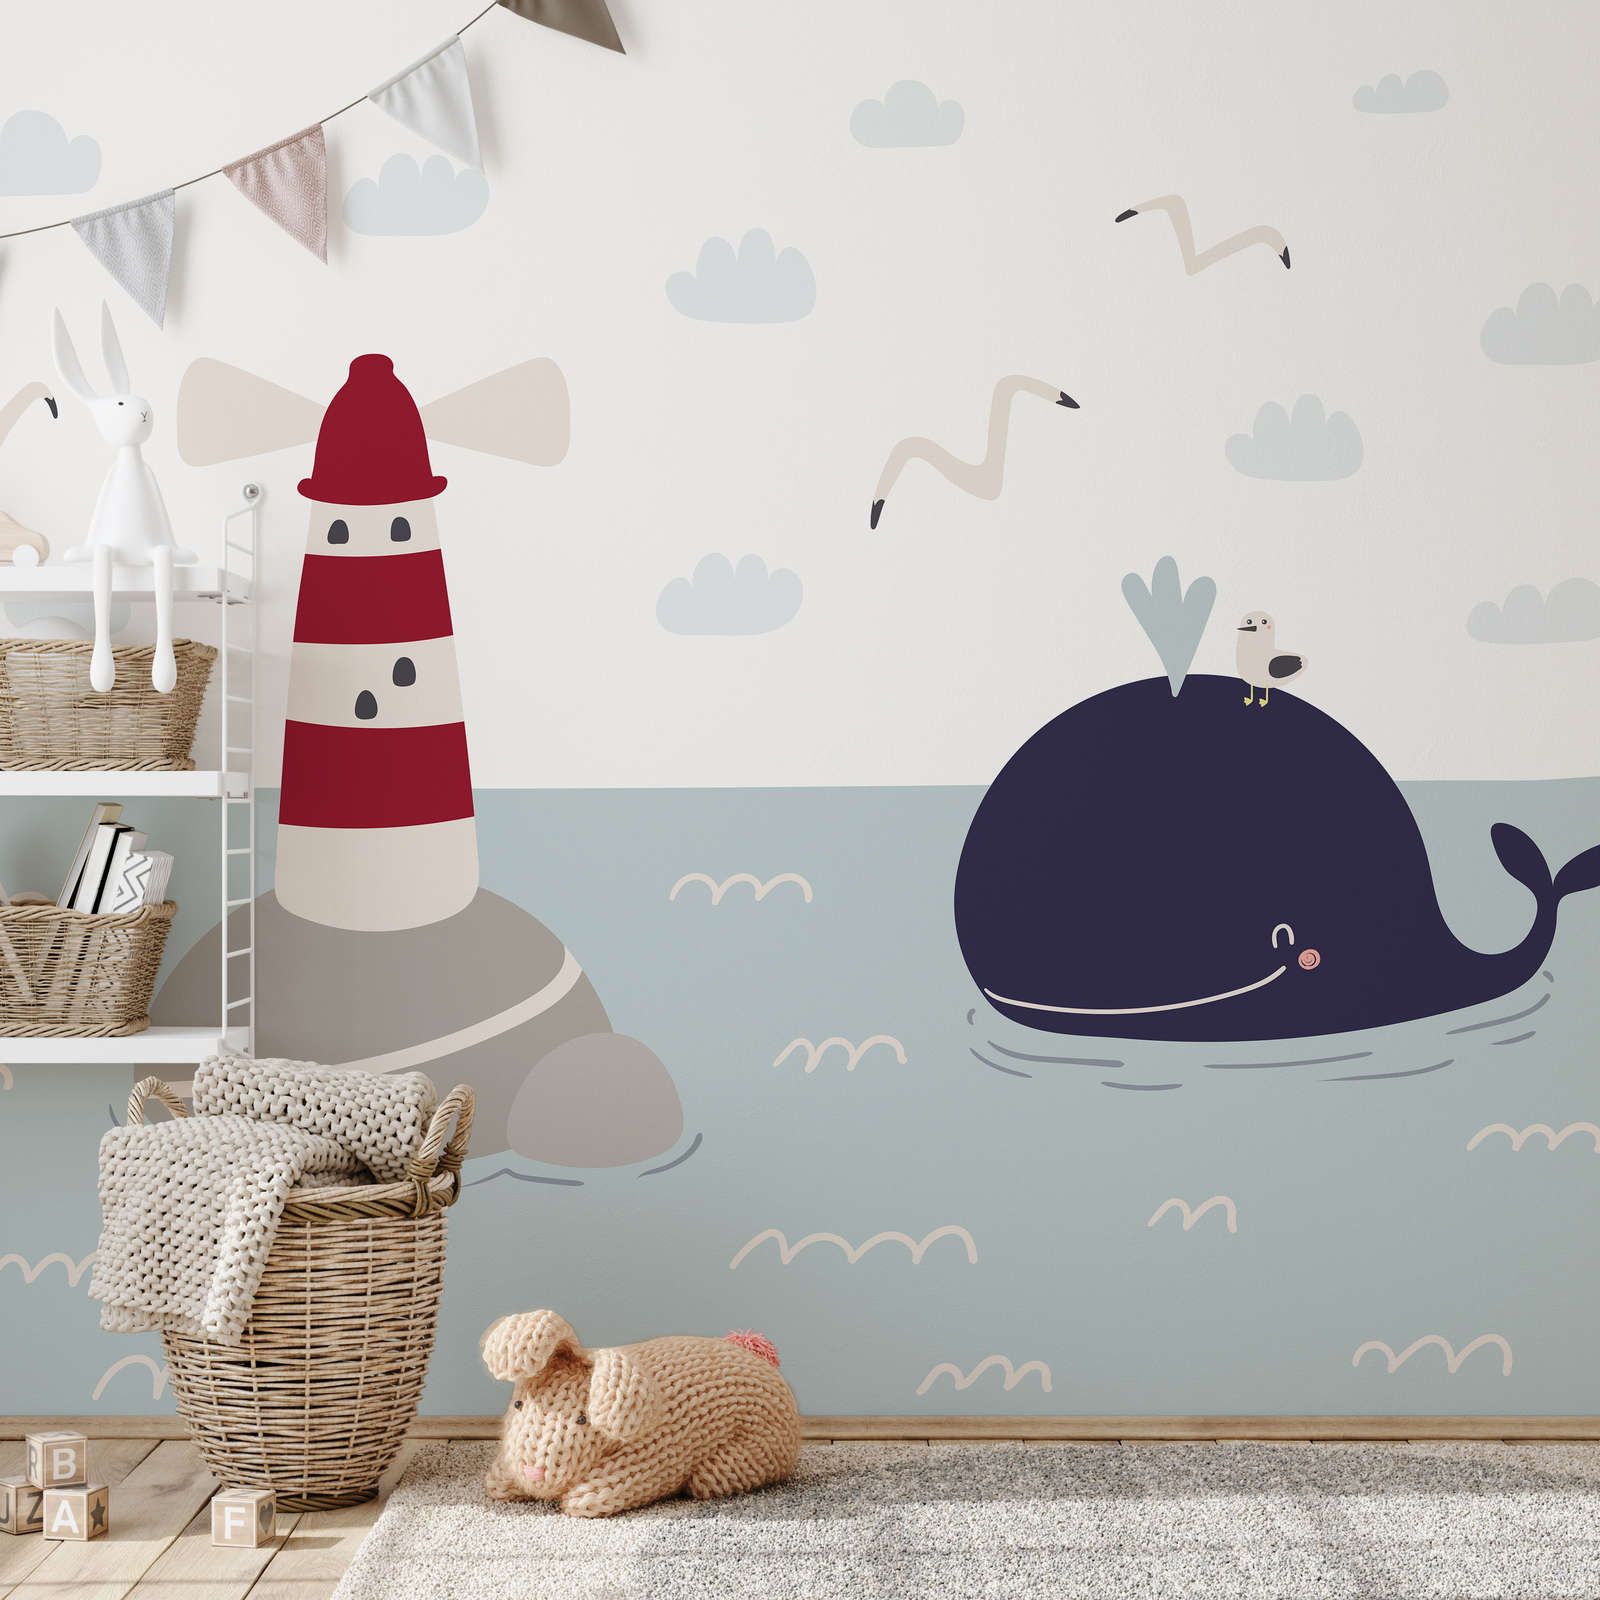             Children's Room Wallpaper with Lighthouse and Whale - Smooth & Matt Non-woven
        